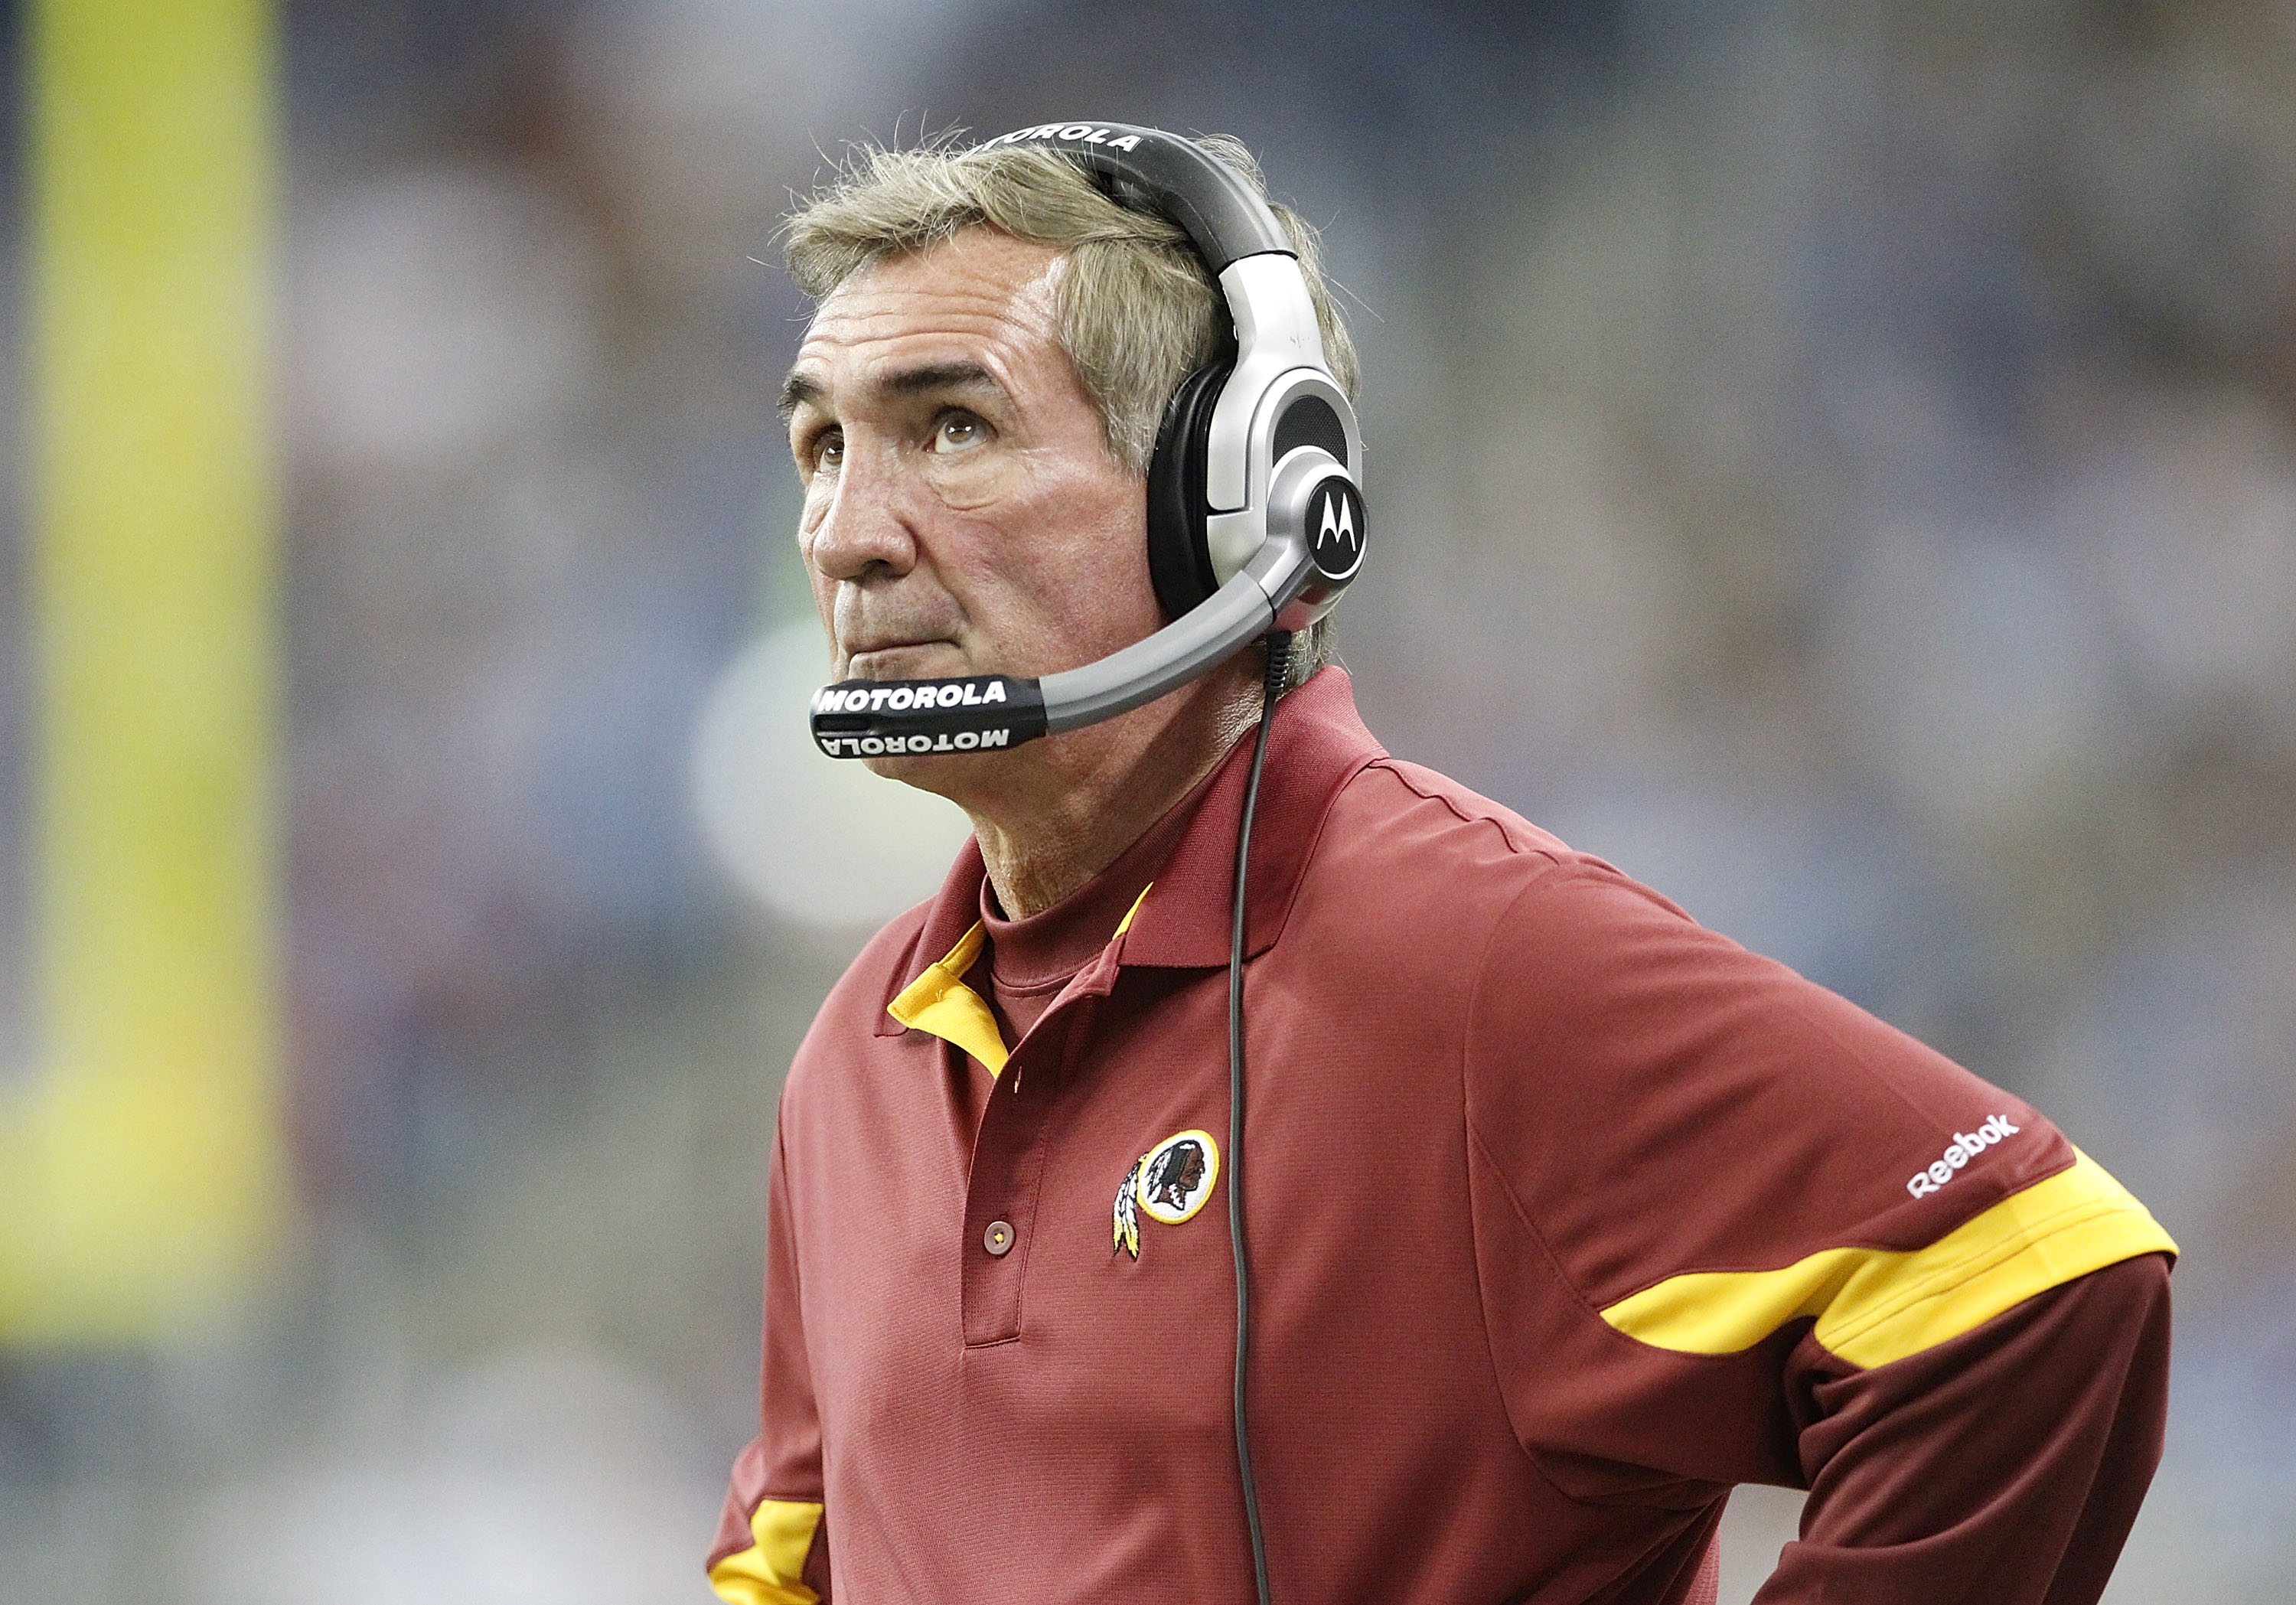 DETROIT - OCTOBER 31: Washington Redskins head coach Mike Shanahan watches the action during the game against the Detroit Lions at Ford Field on October 31, 2010 in Detroit, Michigan. The Lions defeated the Redskins 37-25.  (Photo by Leon Halip/Getty Imag